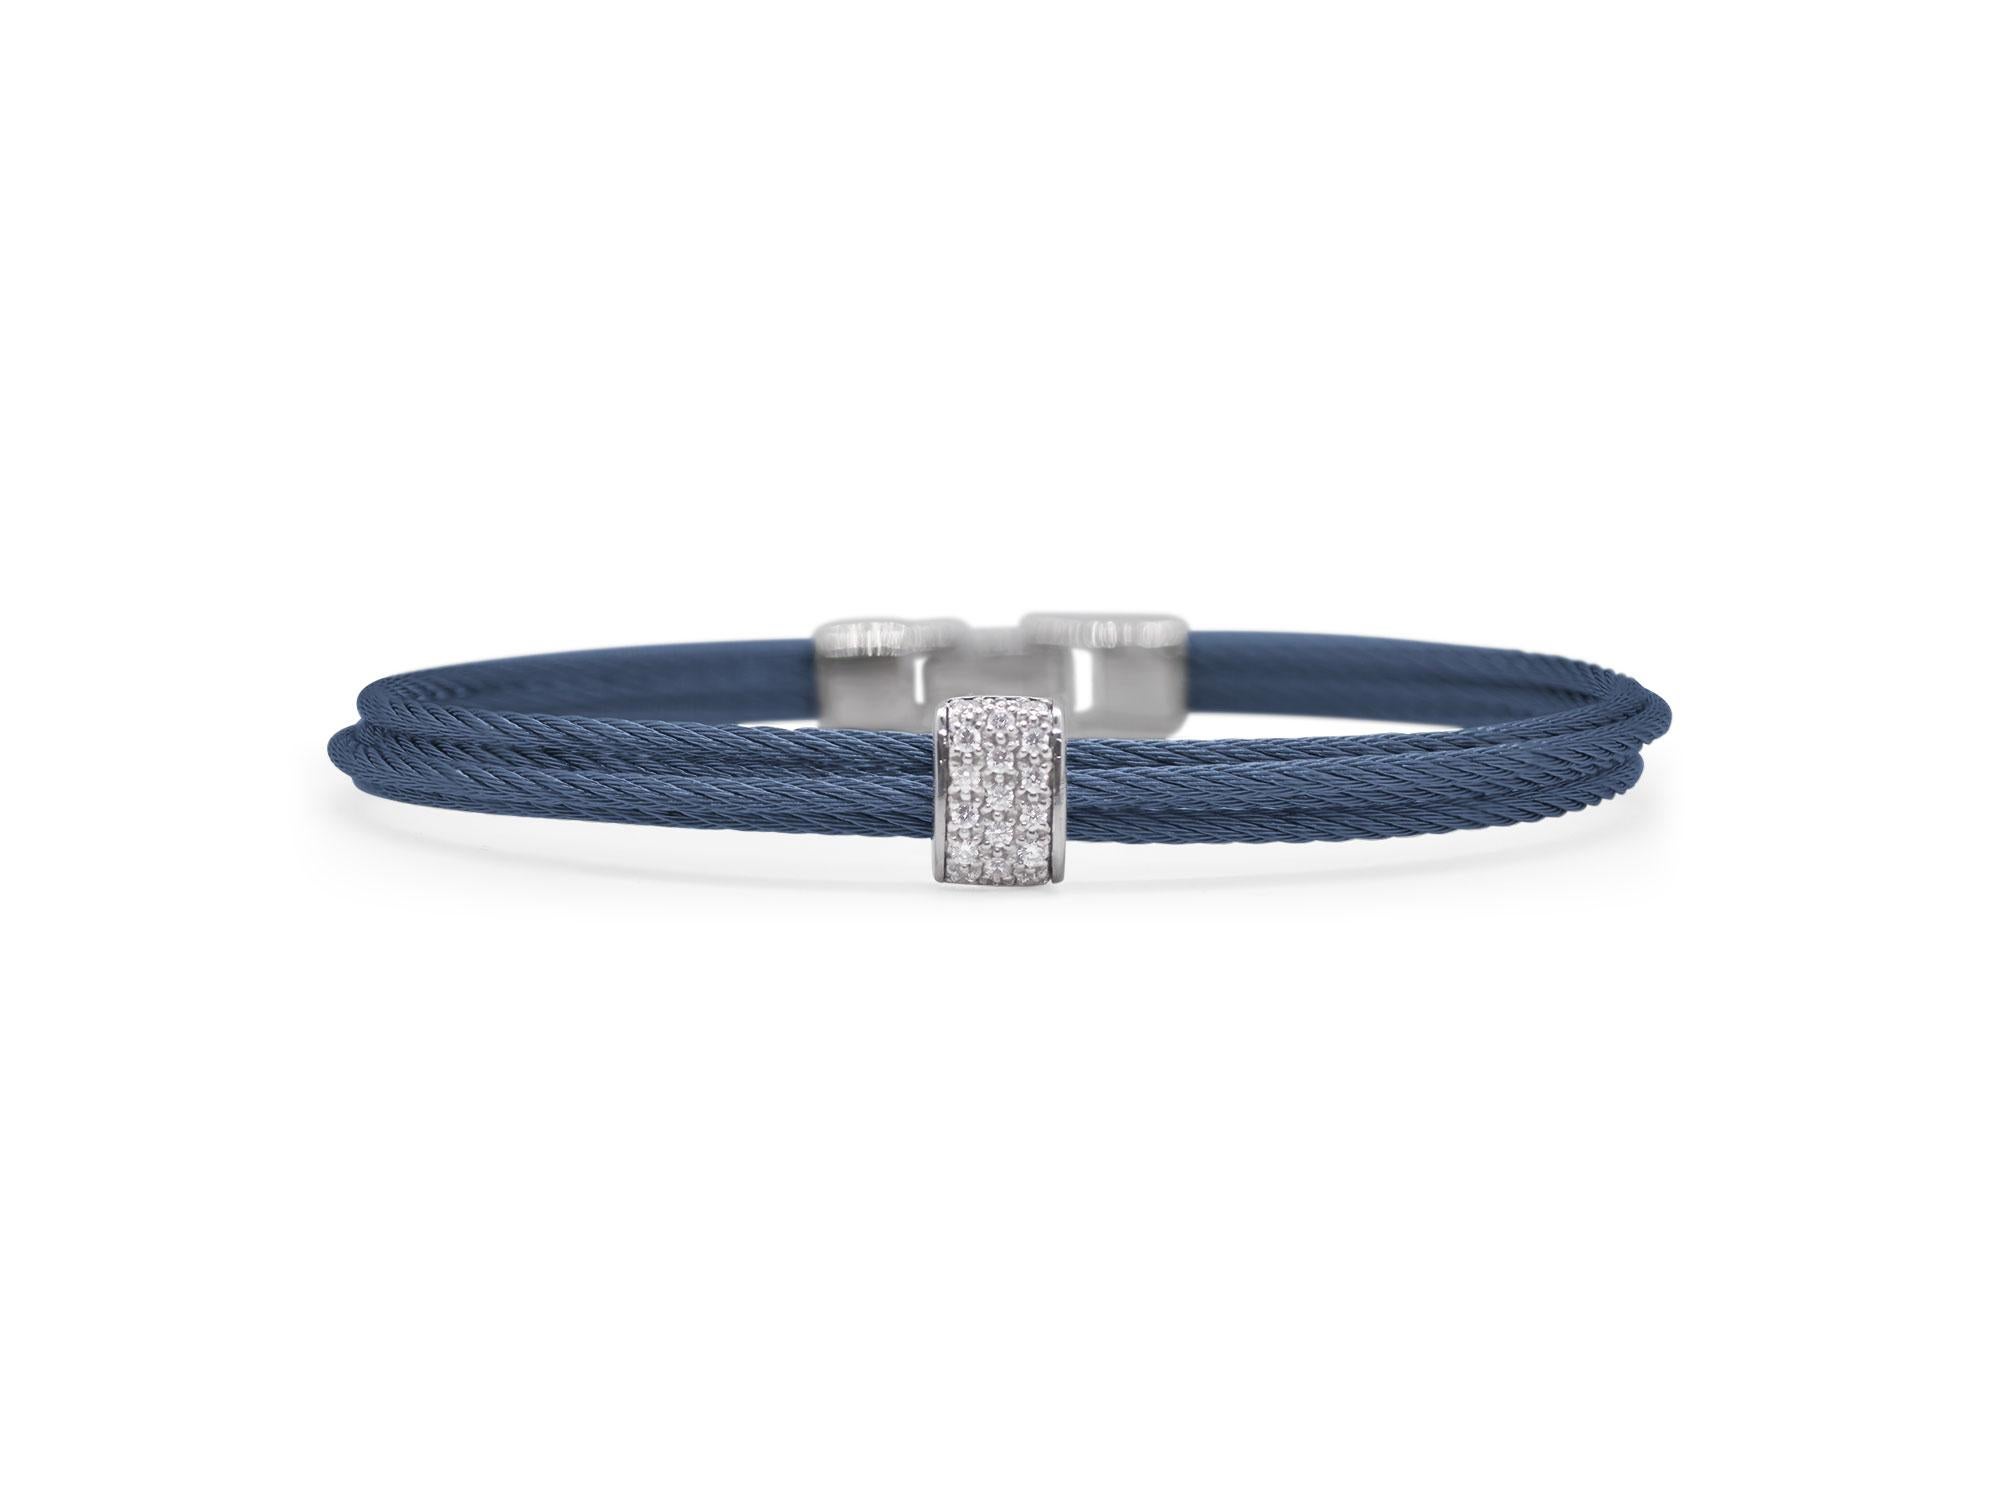 Blueberry cable with 18kt white gold and 0.15 total carat weight diamonds.

BRACELET TYPE: Bangle, Diamond
MATERIAL: 18K White Gold
GENDER: Ladies
STONES TYPE: Diamond
STONES SHAPE: Round
STONES TOTAL WEIGHT - CT: 0.15
SIZE: 6.75
COLLECTION: